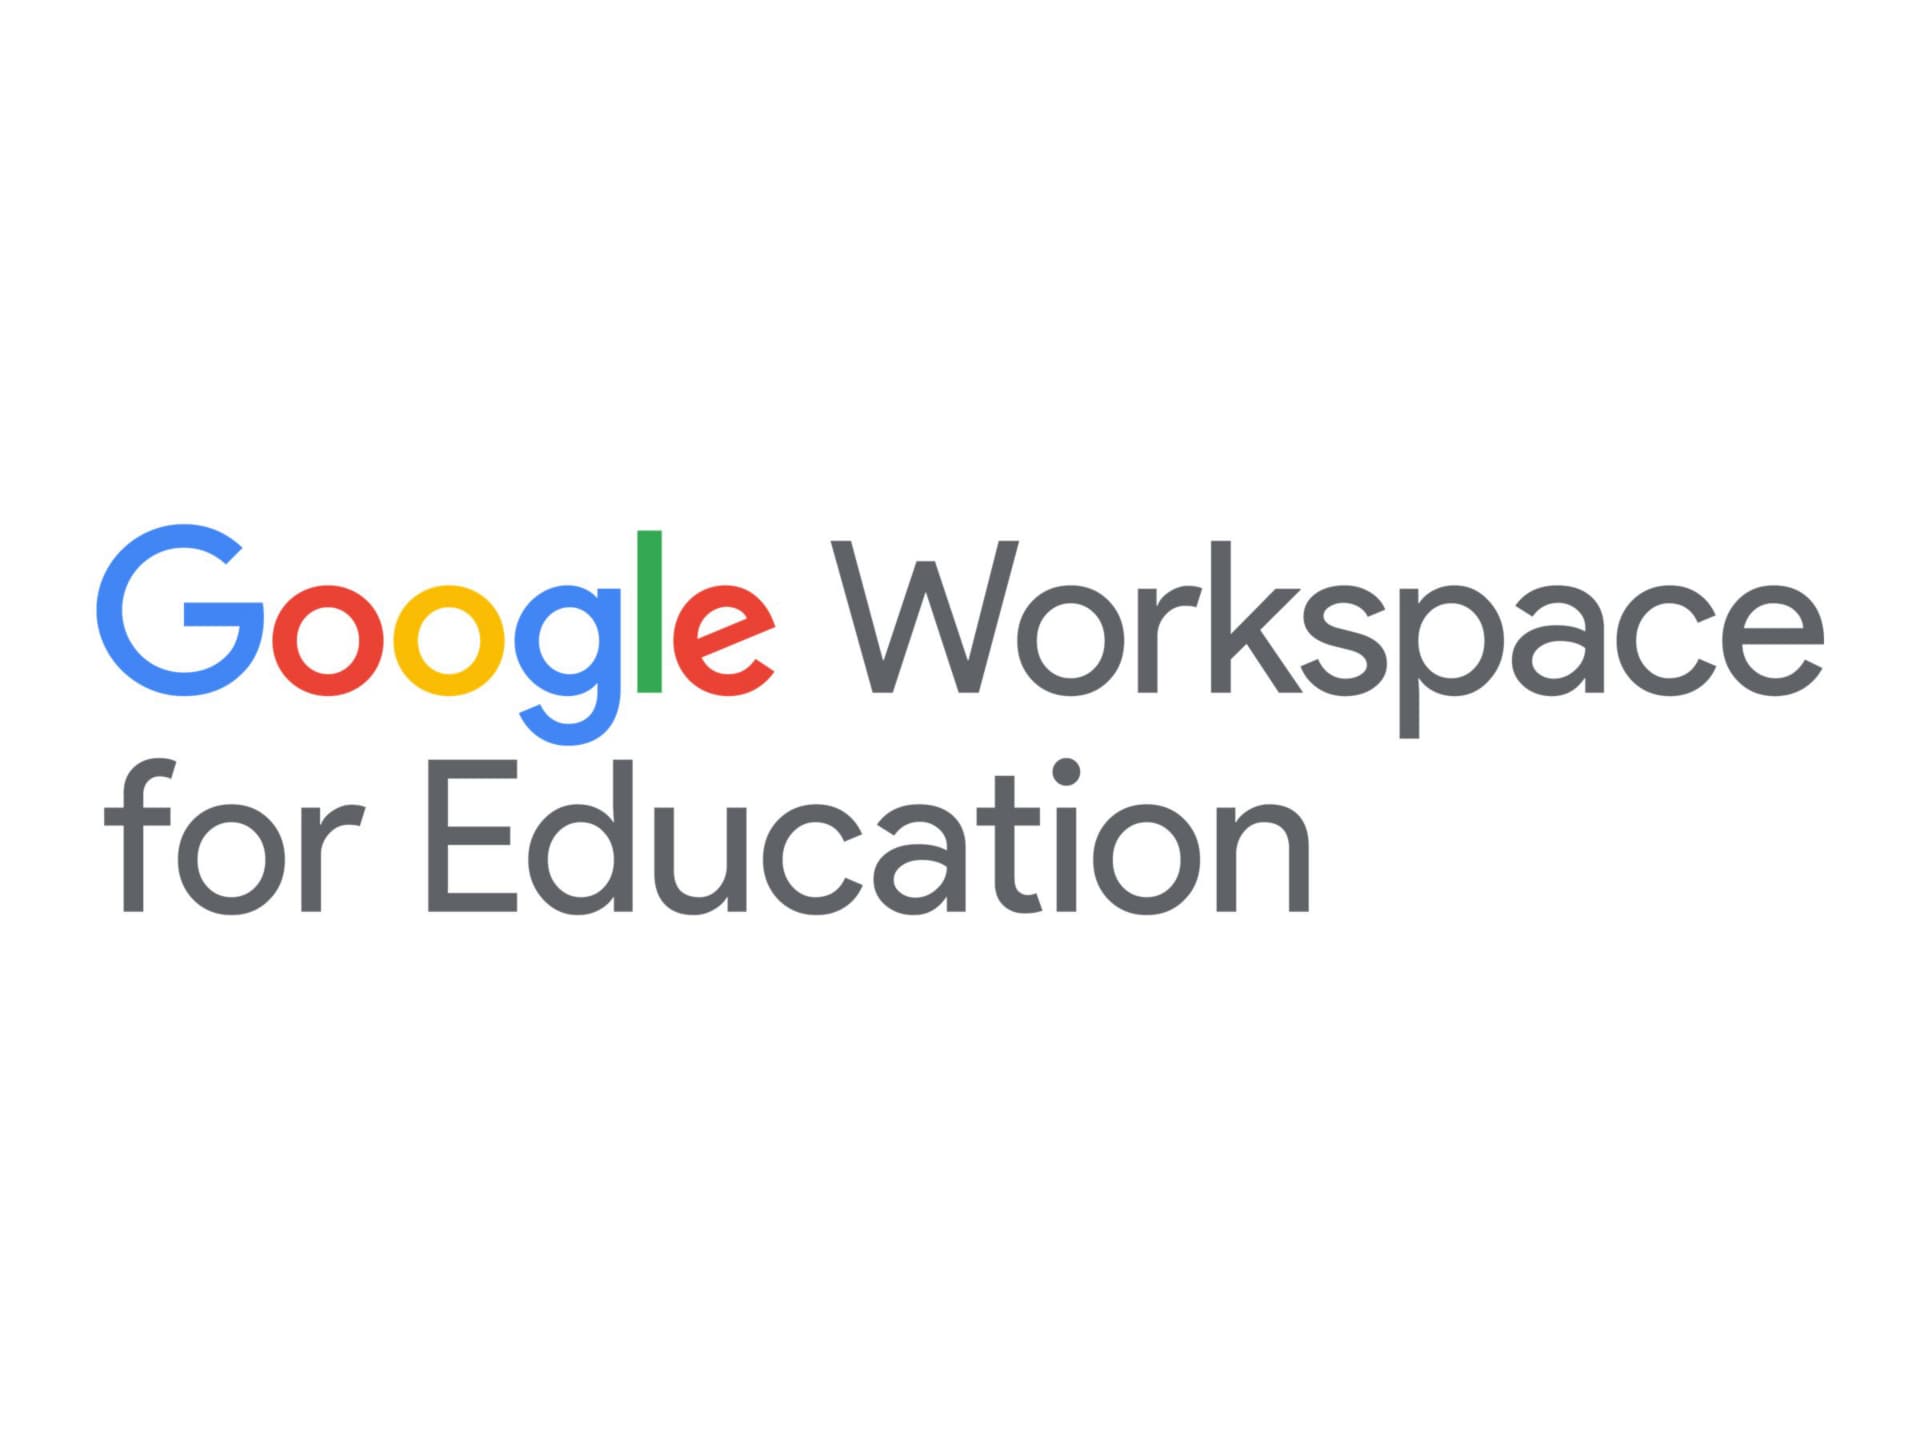 Google Workspace for Education Teaching and Learning Upgrade - subscription